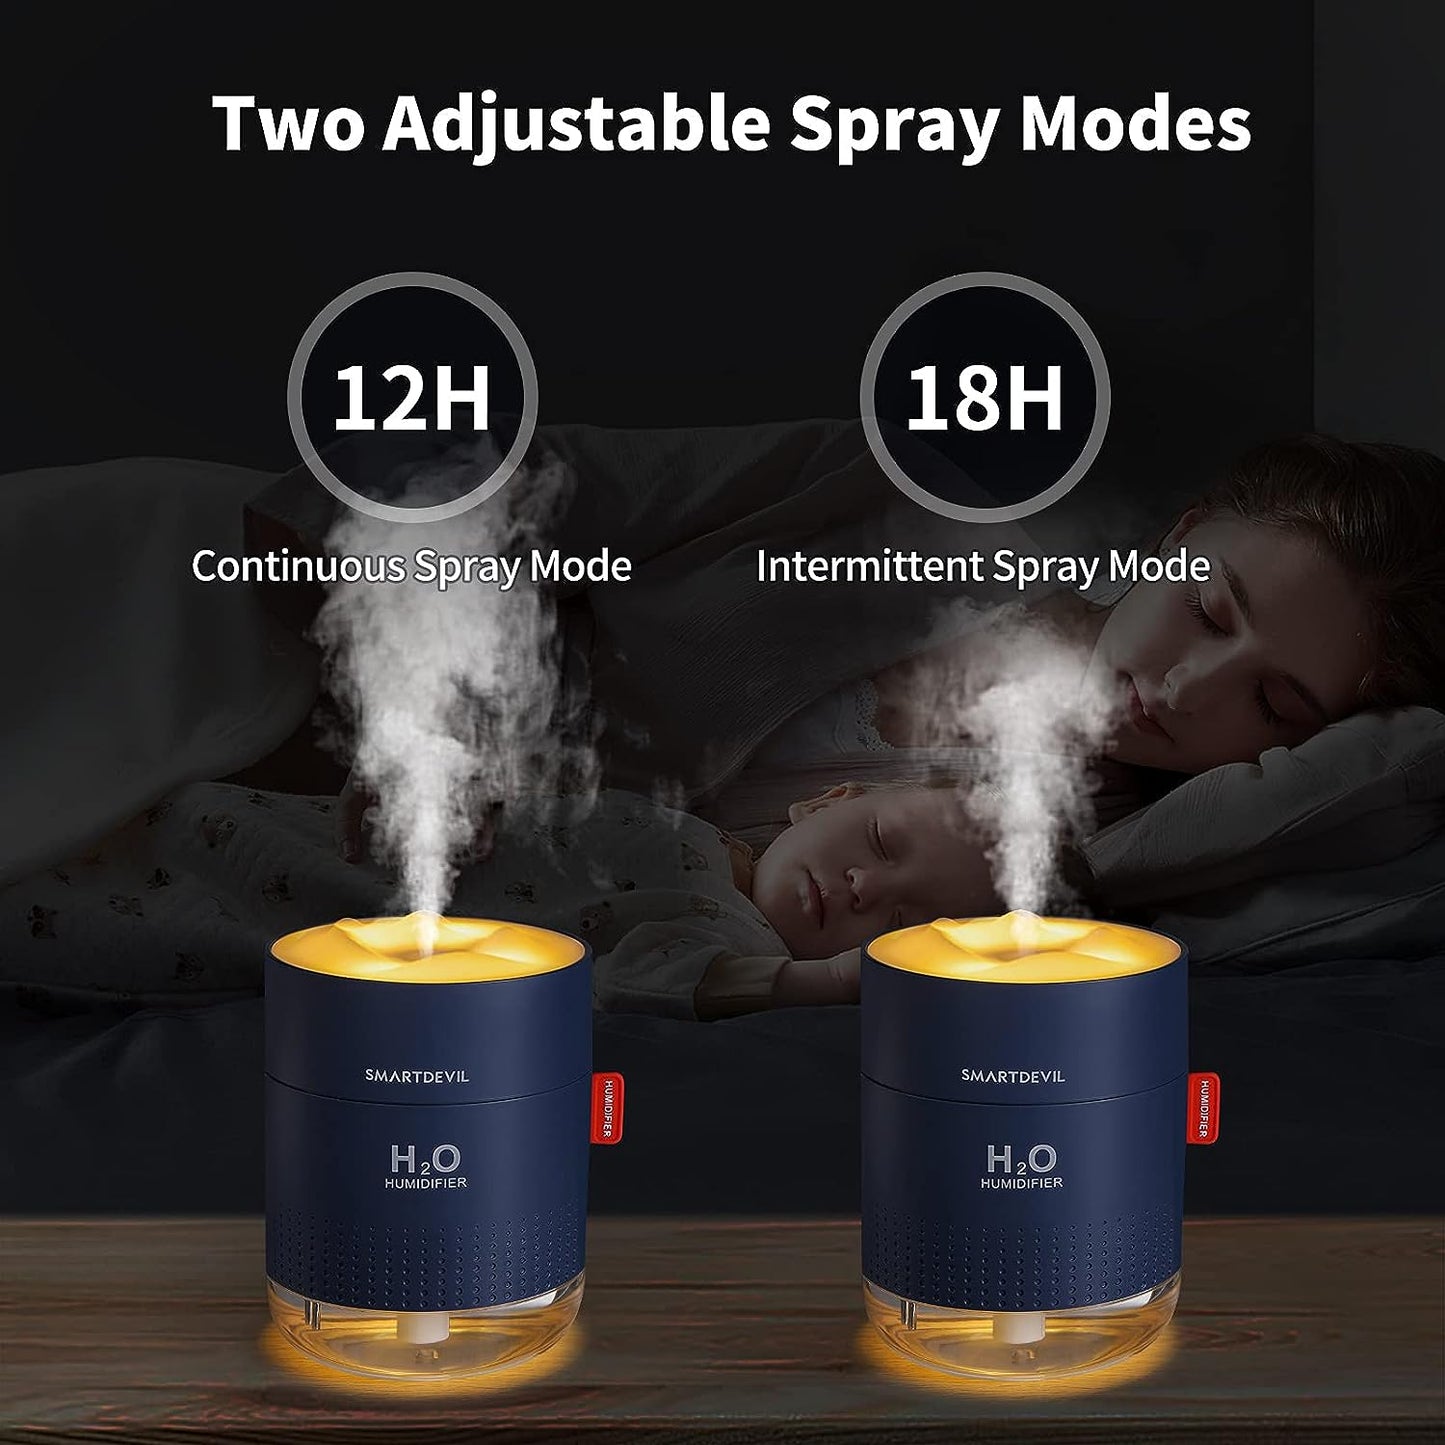 SmartDevil Humidifiers 500ml for Home, Cool Mist Air Humidifier with Night Light, Whisper Quiet USB Humidifiers, Waterless Auto-Off, Humidifiers for Bedroom Baby, Yoga, Office, Plants - 2 Filter